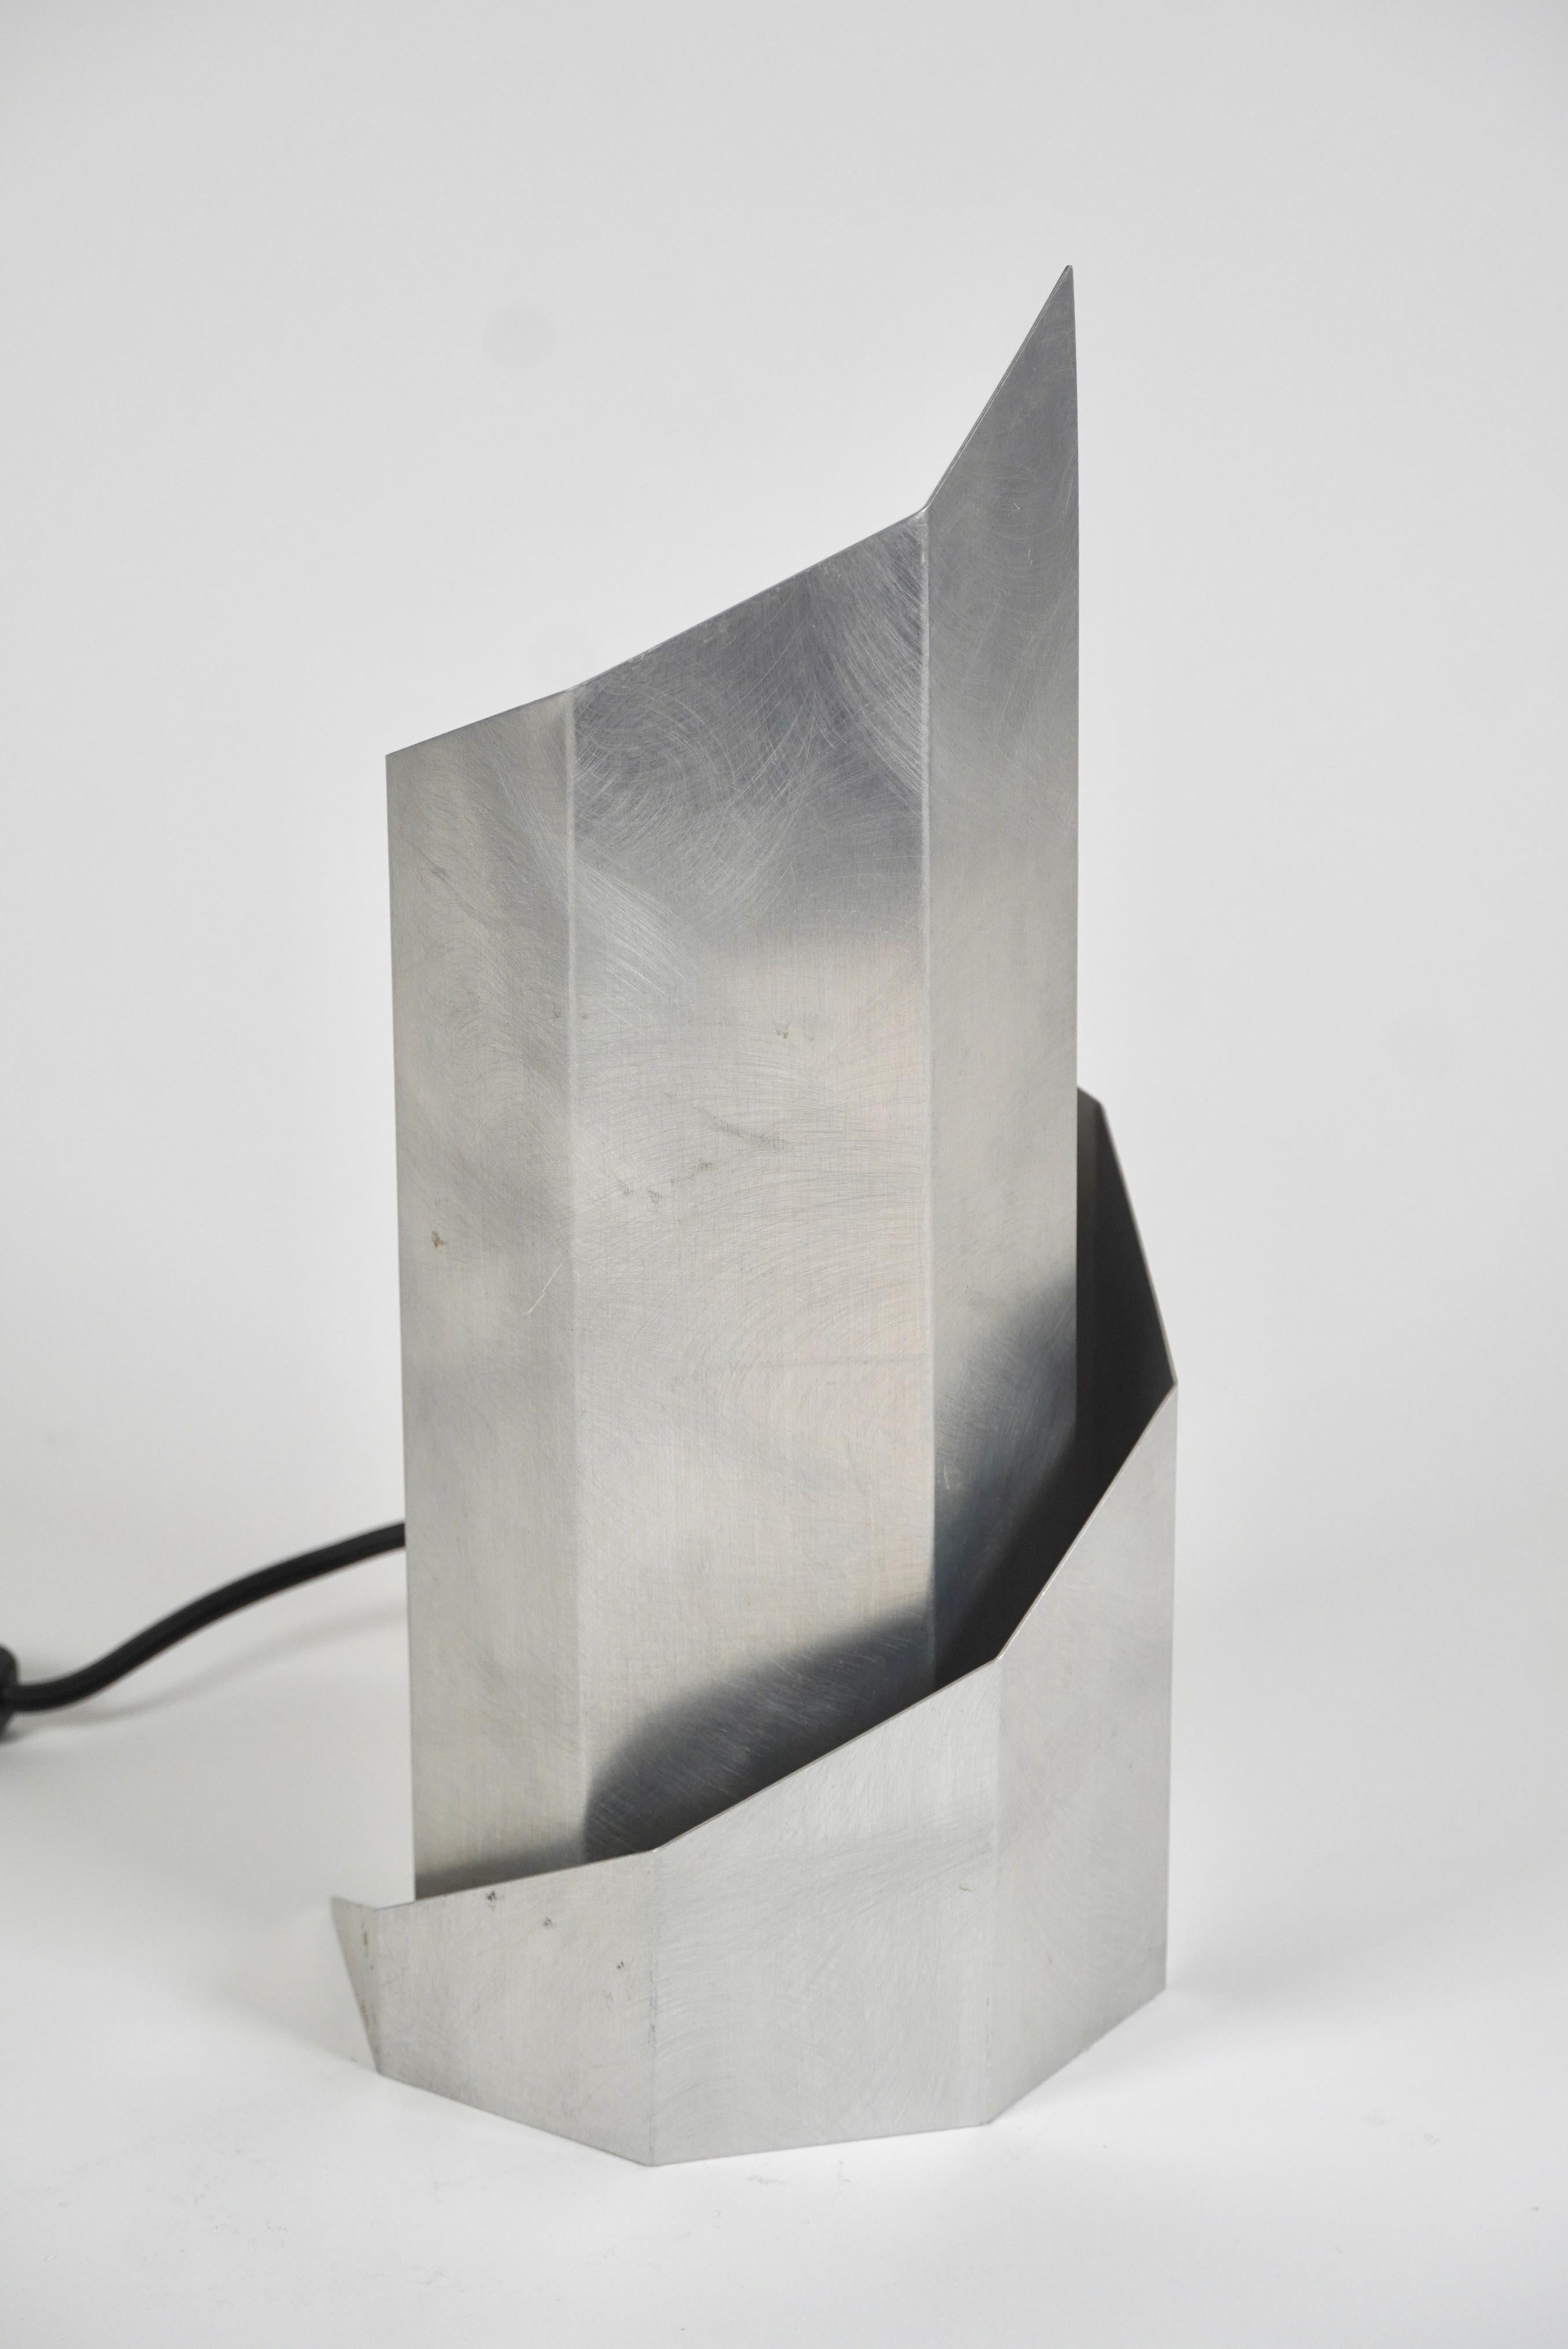 Folded aluminum table lamp by the design team of Godley-Schwan the angled folds create a spiral with both the top and base end in a point, the design casts an atmospheric light. Godley-Schwan began in 1984 when Lyn Godley and her husband, Lloyd